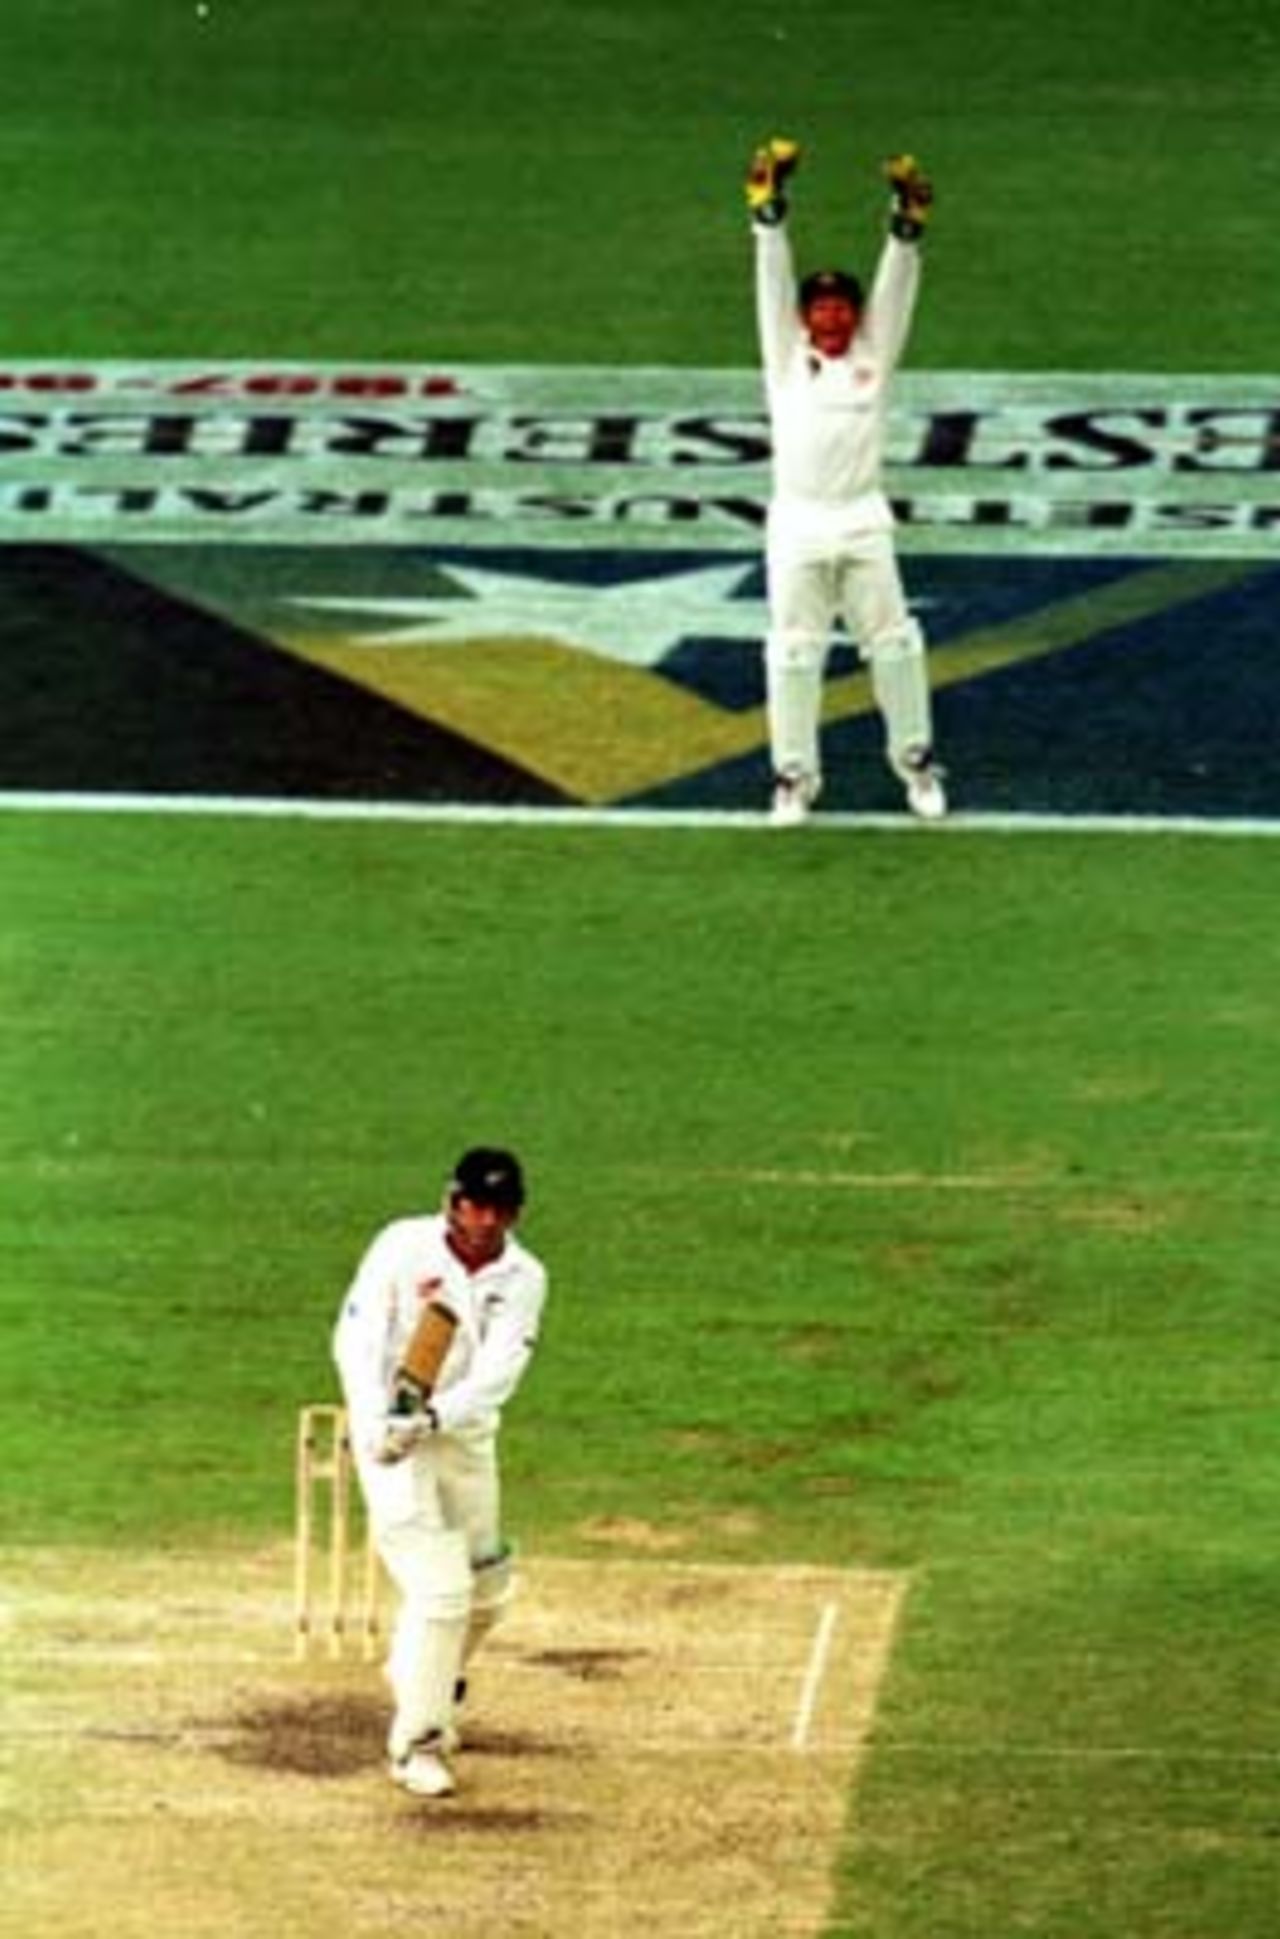 Ian Healy appeals as Stephen Fleming is given out LBW during the third day of the 1st Test between Australia and New Zealand at Brisbane, 7 - 11 Nov 1997